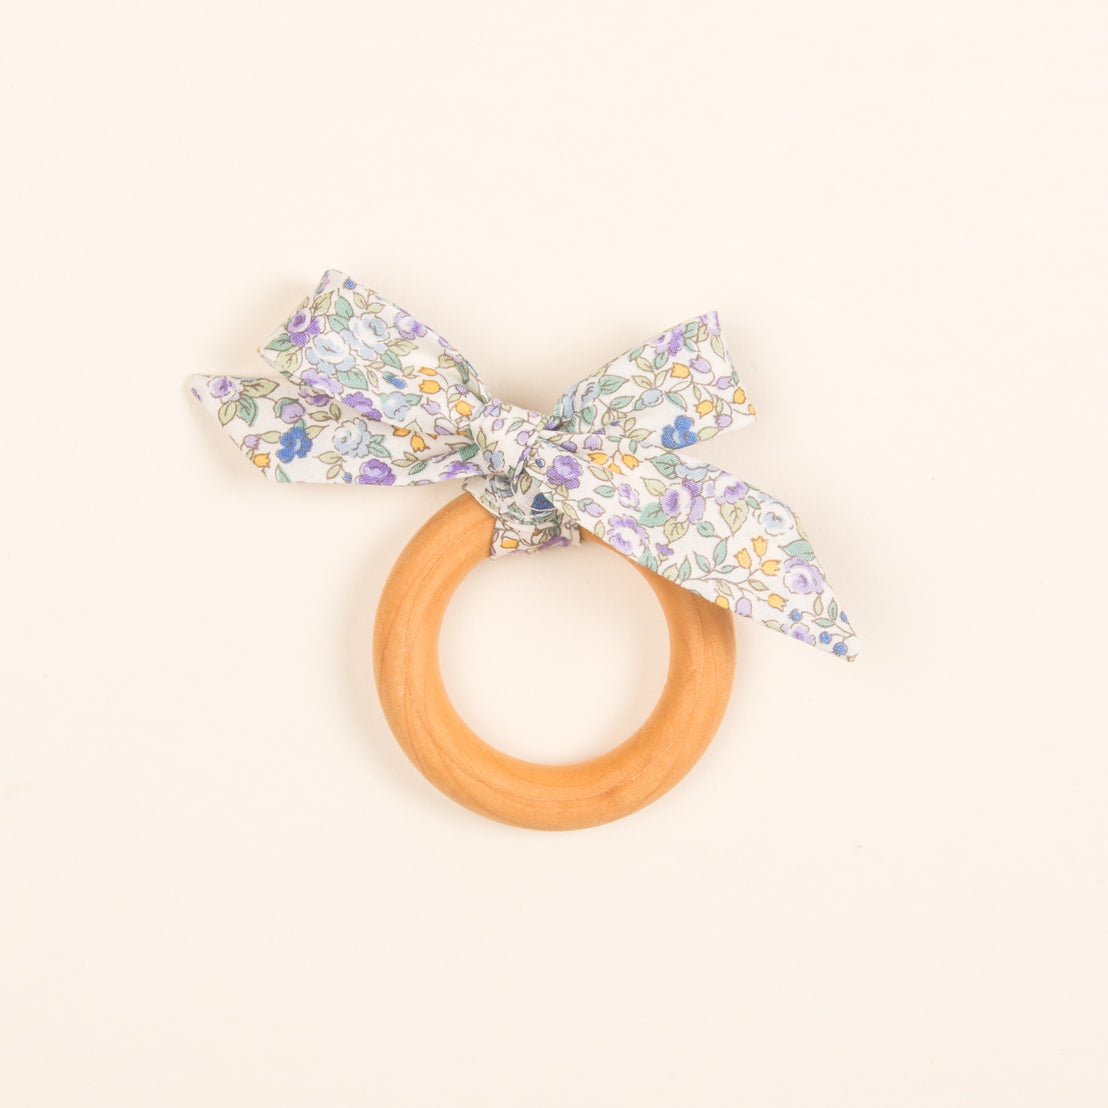 An heirloom, handcrafted Petite Fleur Wooden Teether Ring with a floral fabric bow attached, set against a light beige background.